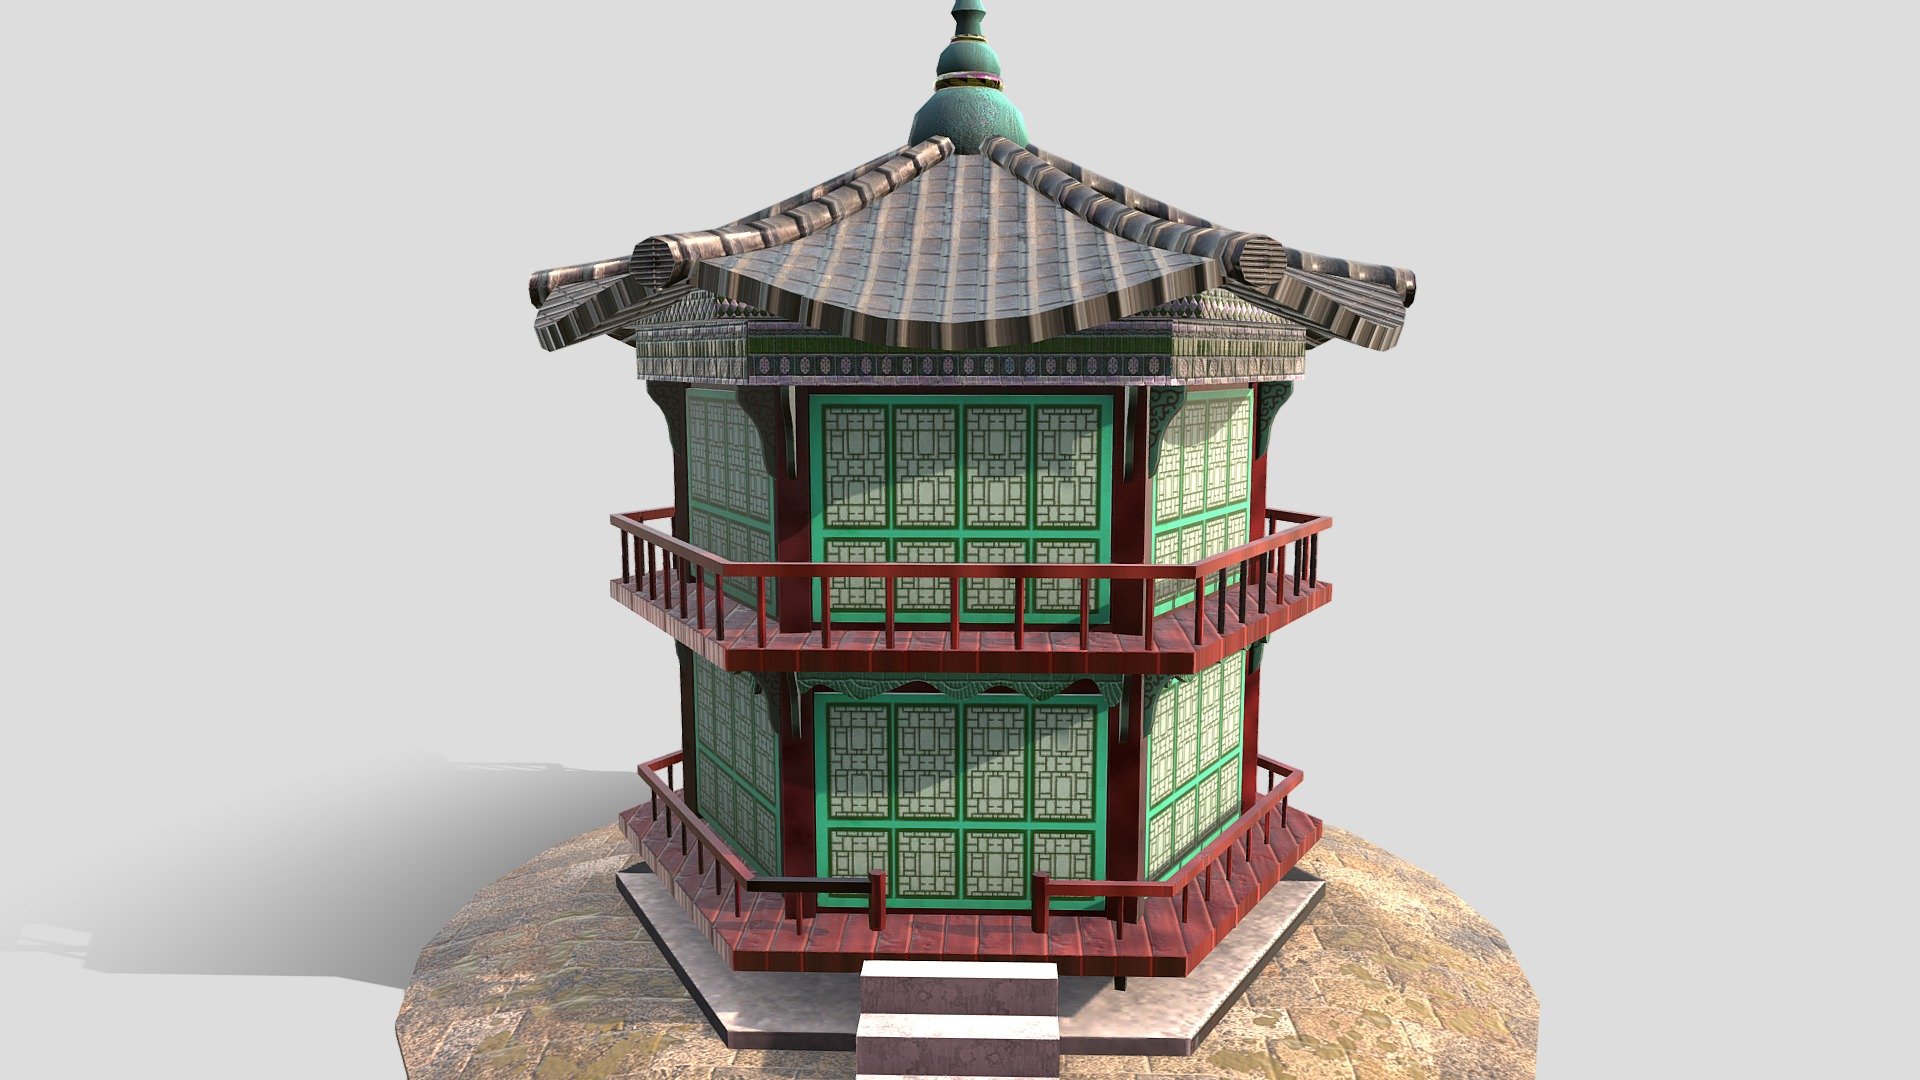 Hyangwonjeong Pavilion is a two story hexagonal pavilion built on a small island in the middle of a lake on the northern grounds of Gyeongbokgung Palace is Seoul Korea - Hyangwonjeong Pavelion - 3D model by Farago 3d model